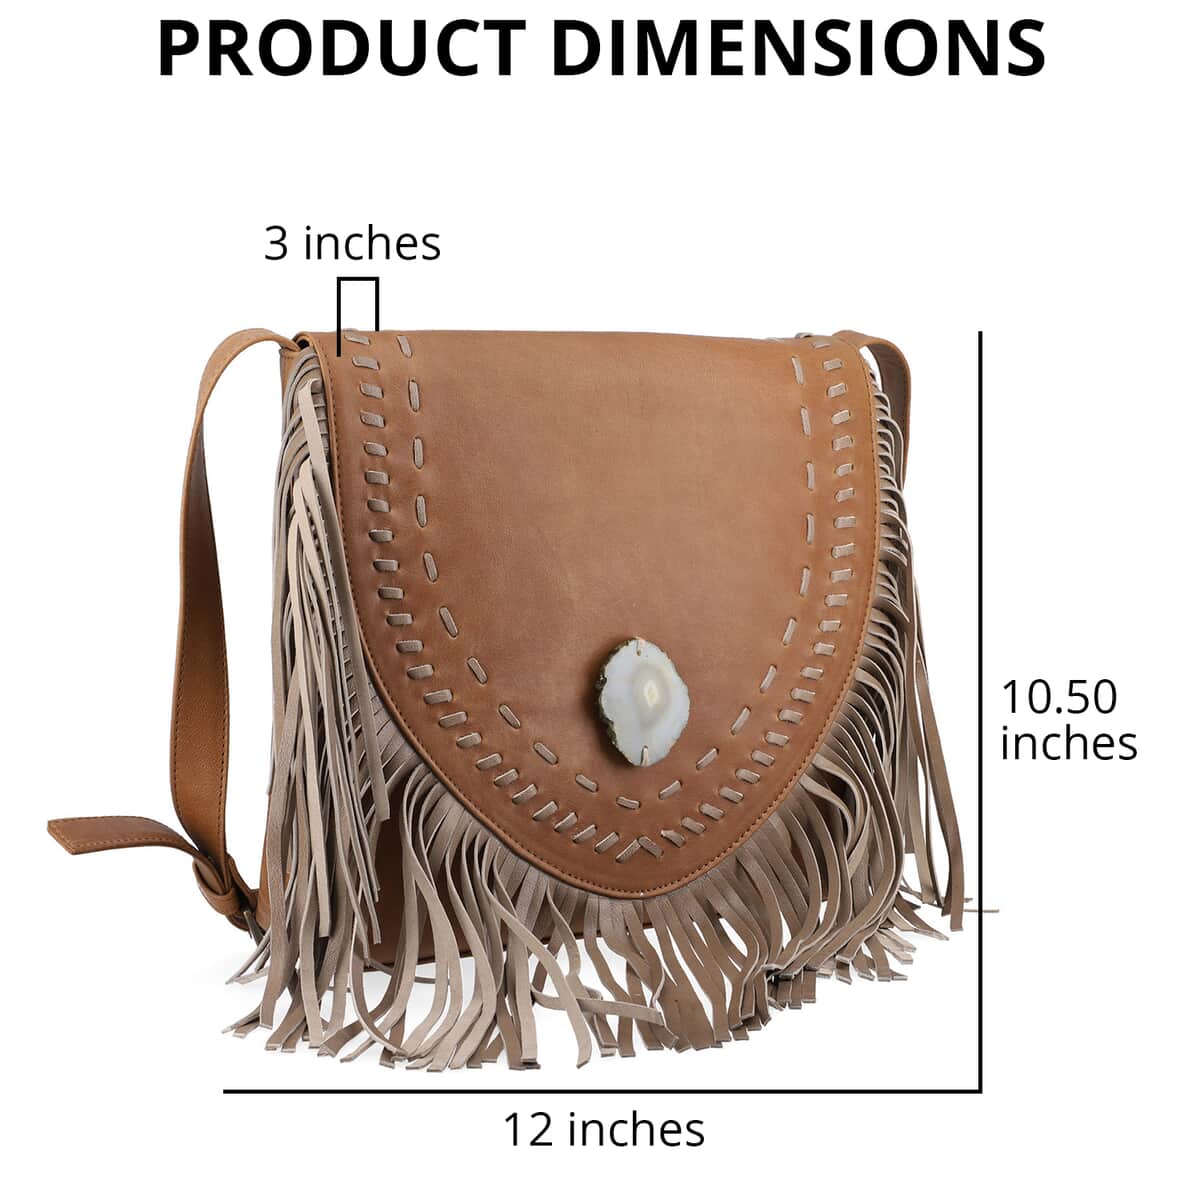 "100% Genuine Leather Crossbody Bag with Agate Stone and Matching Fringes SIZE: 14(L)x3(W)x10.5(H) Inches COLOR: Gray" image number 3